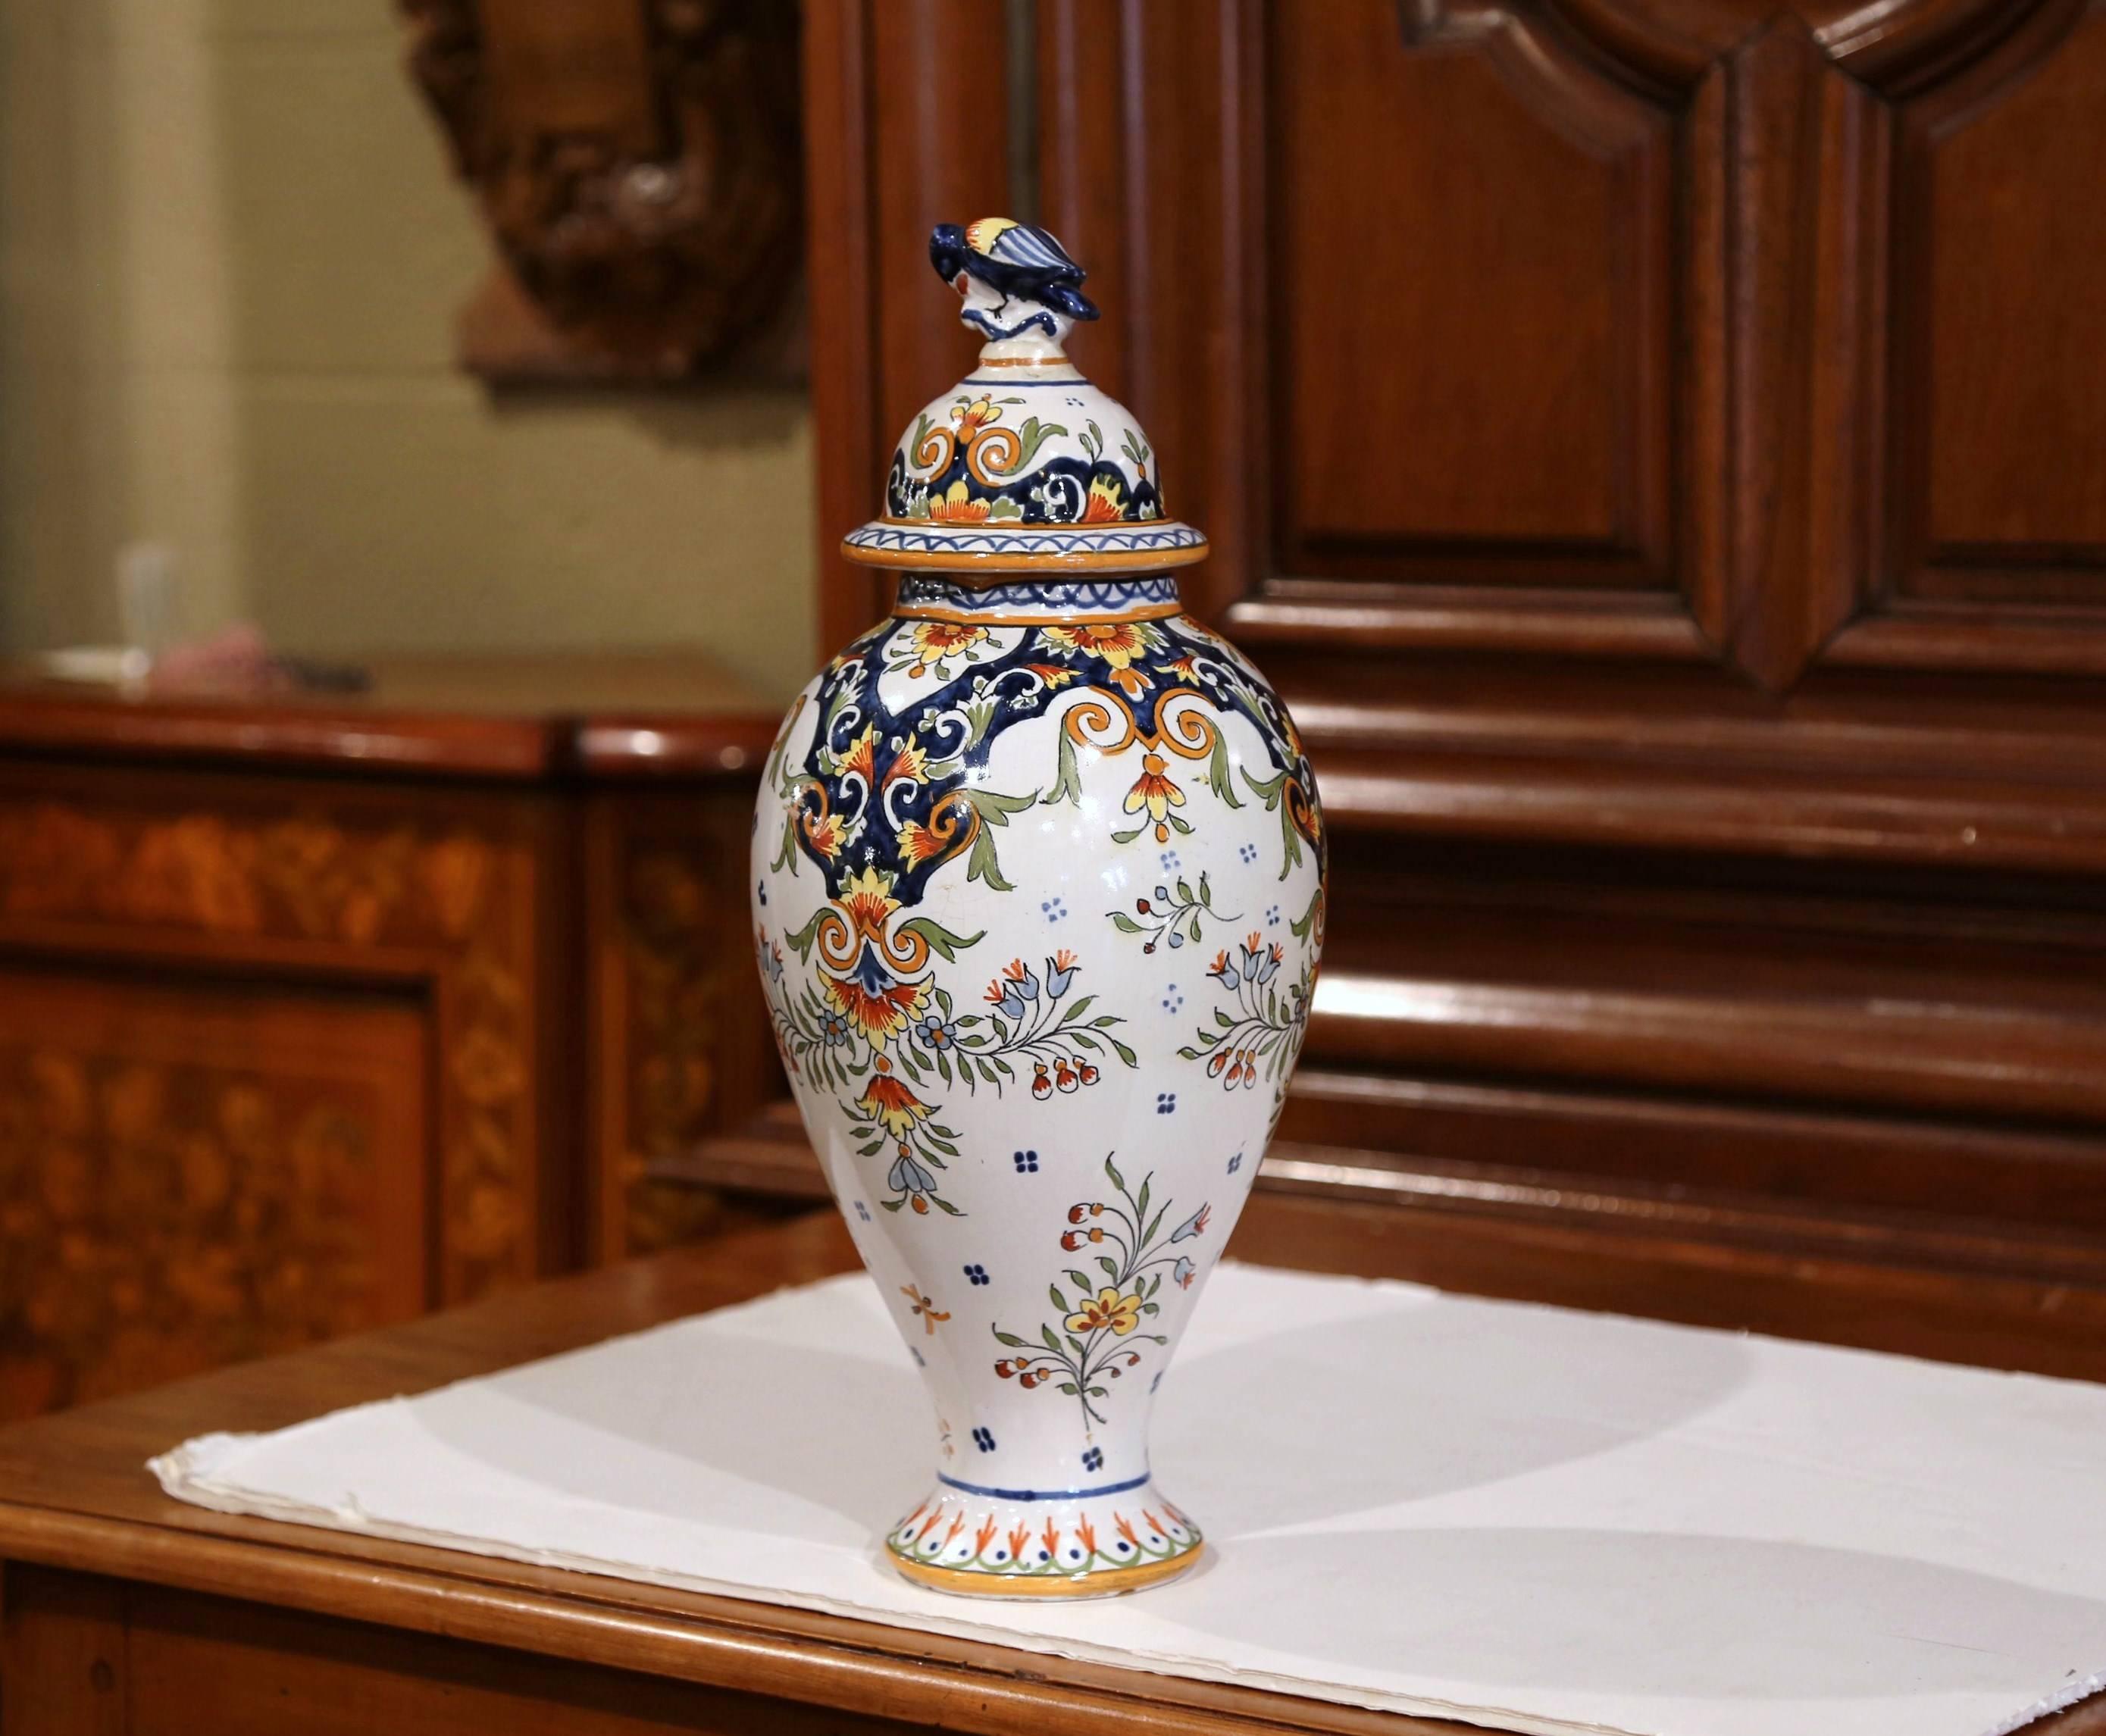 This elegant antique vase was crafted in Normandy, circa 1880. The ceramic, rounded potiche features hand painted flower decor in a traditional blue, white and yellow palette. The lid of the porcelain vase is topped with a small bird figurine. The